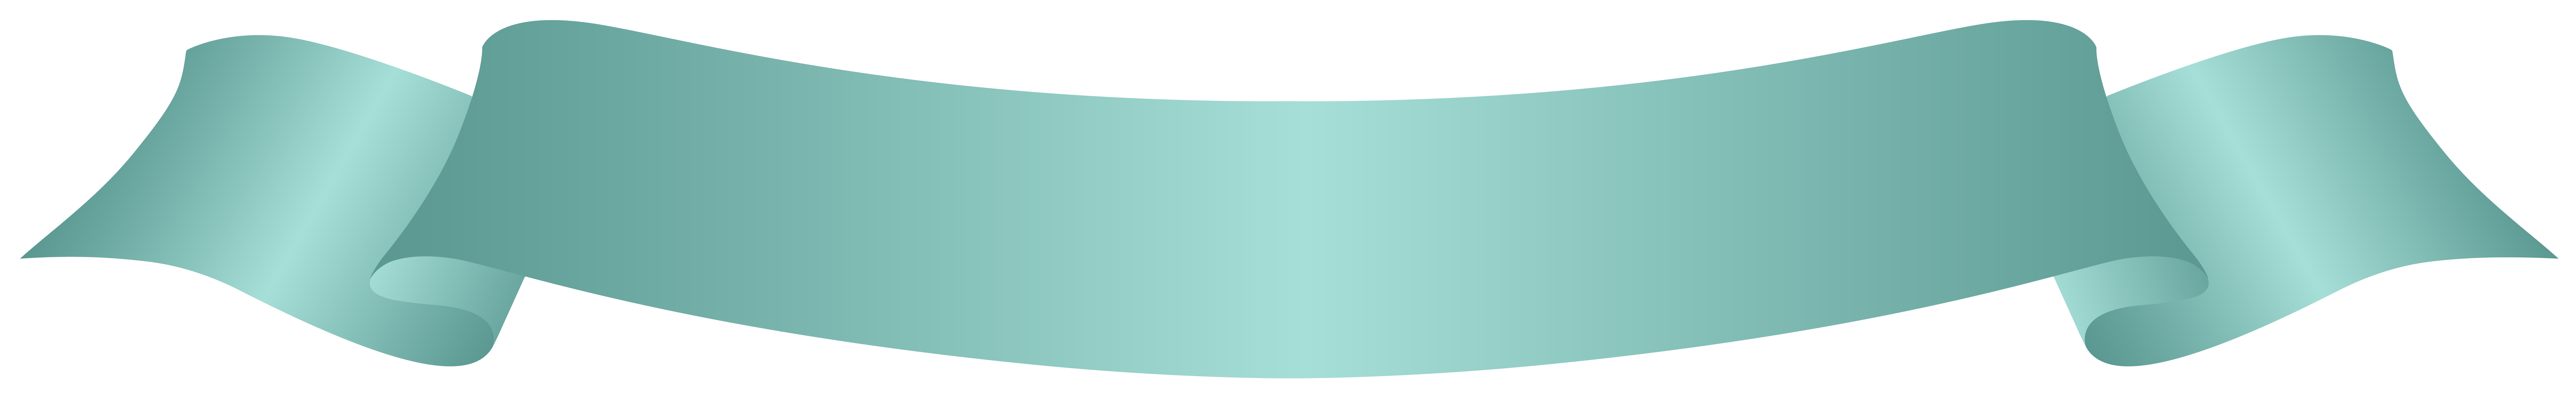 Free Turquoise Banner Cliparts, Download Free Turquoise Banner Cliparts